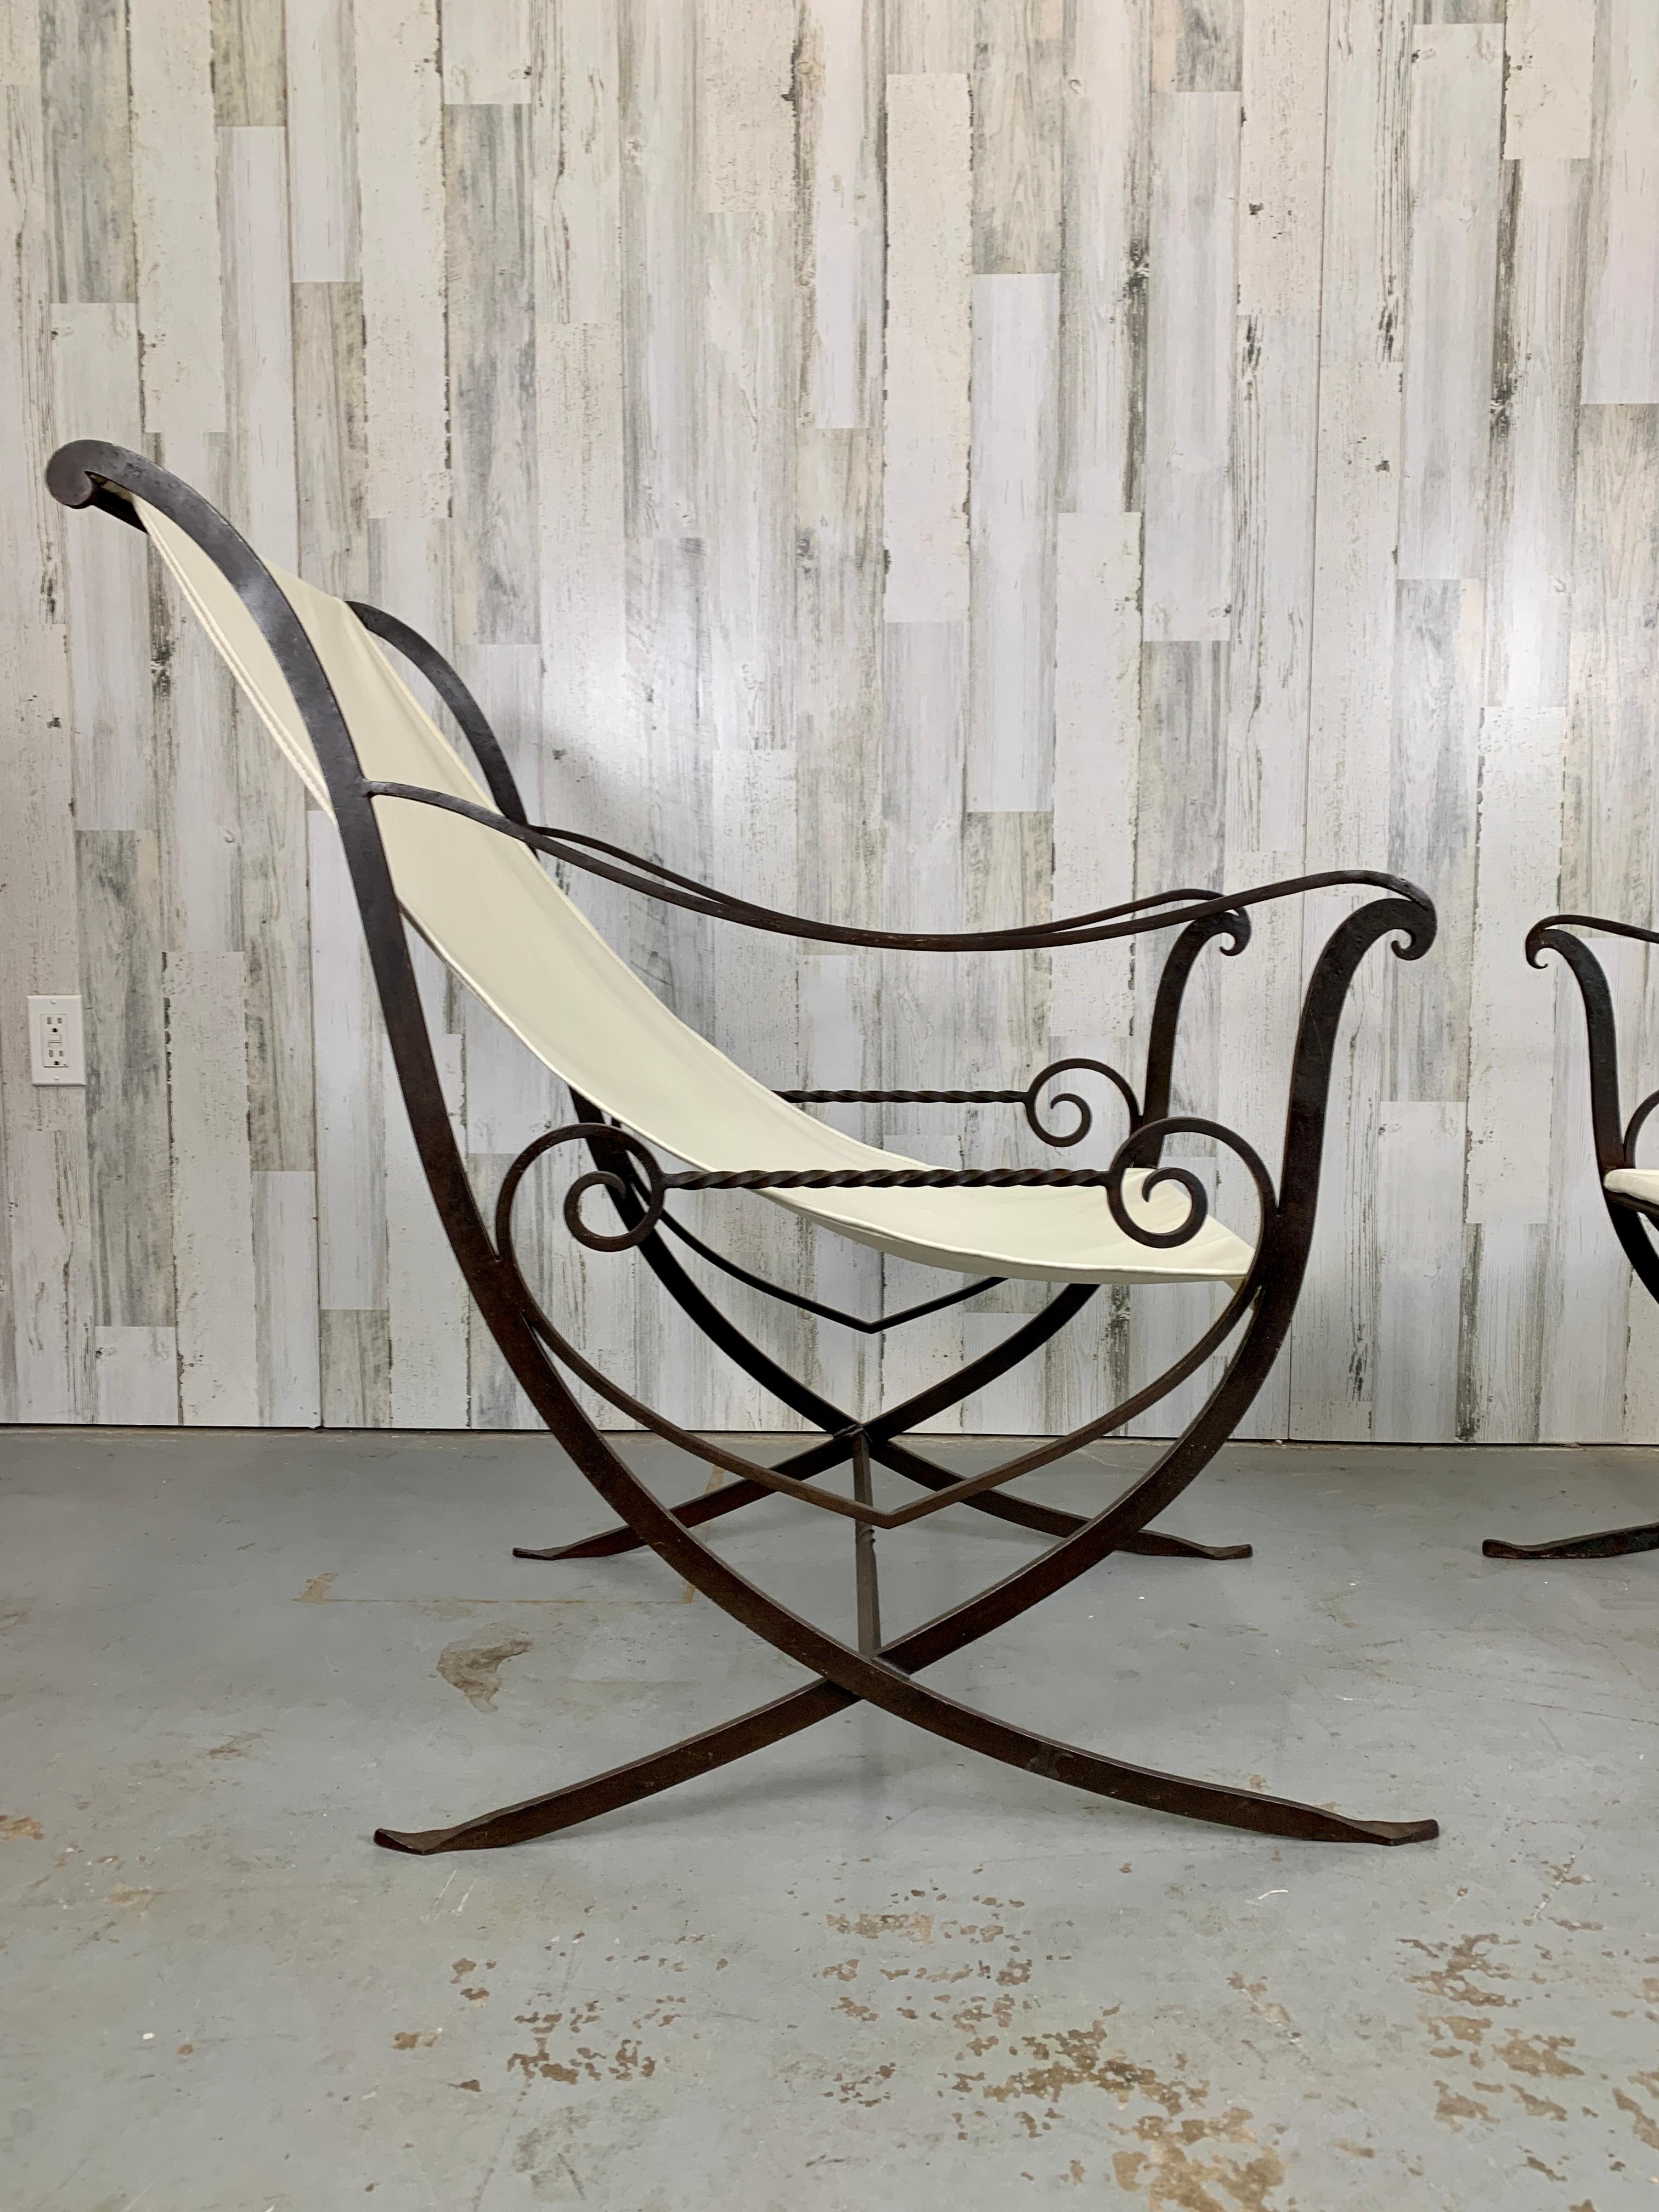 Sculpted Forged Iron Sling Chairs, 1940's For Sale 2